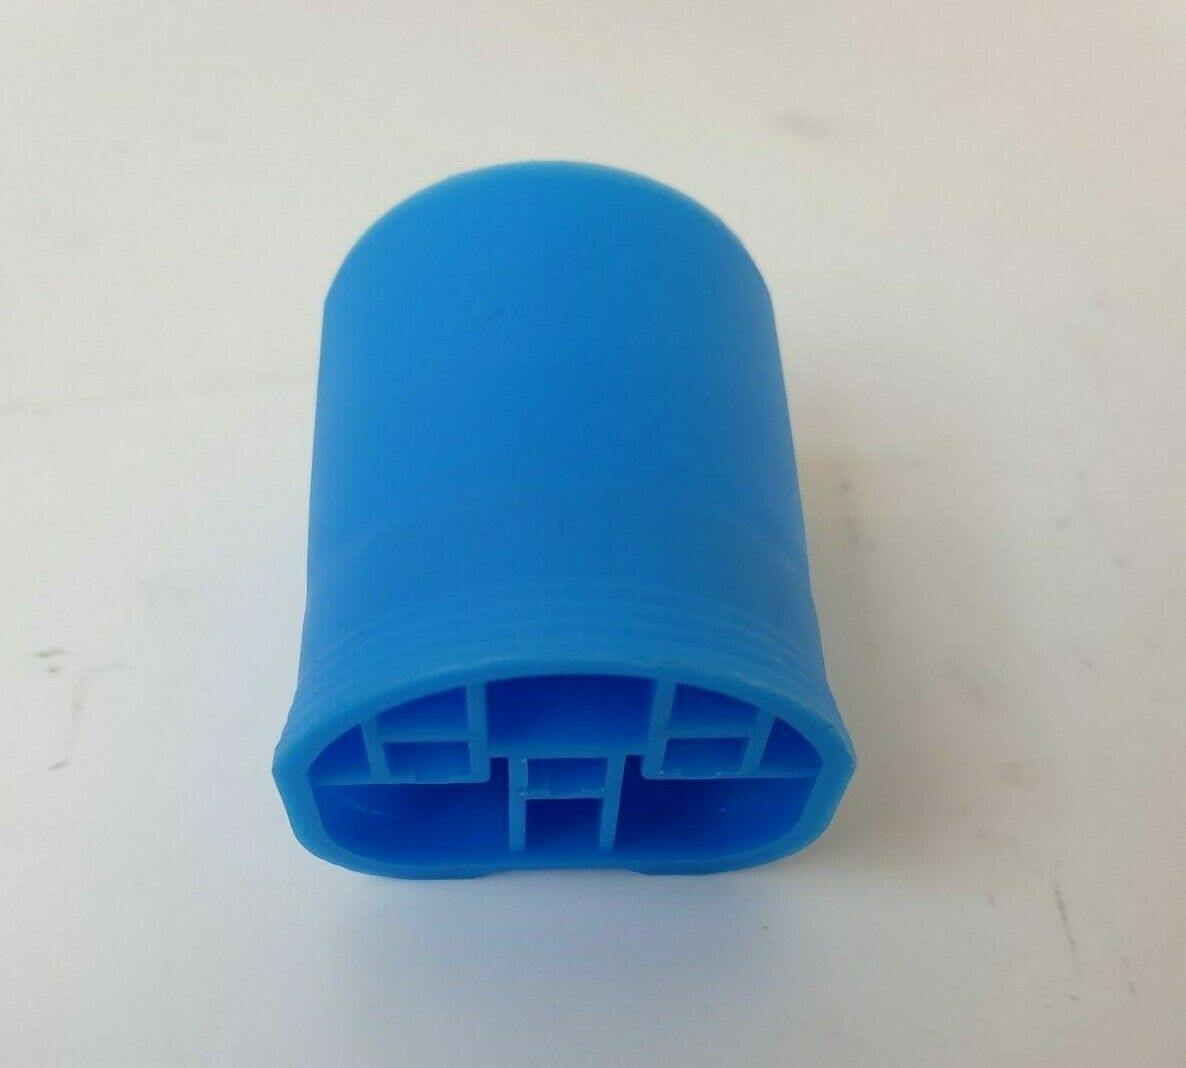 Male Connector Socket For 9004 Hb9004 9007 Hb1 Hb5 Bulbs Mure Ter2017-S - Mid-Ulster Rotating Electrics Ltd